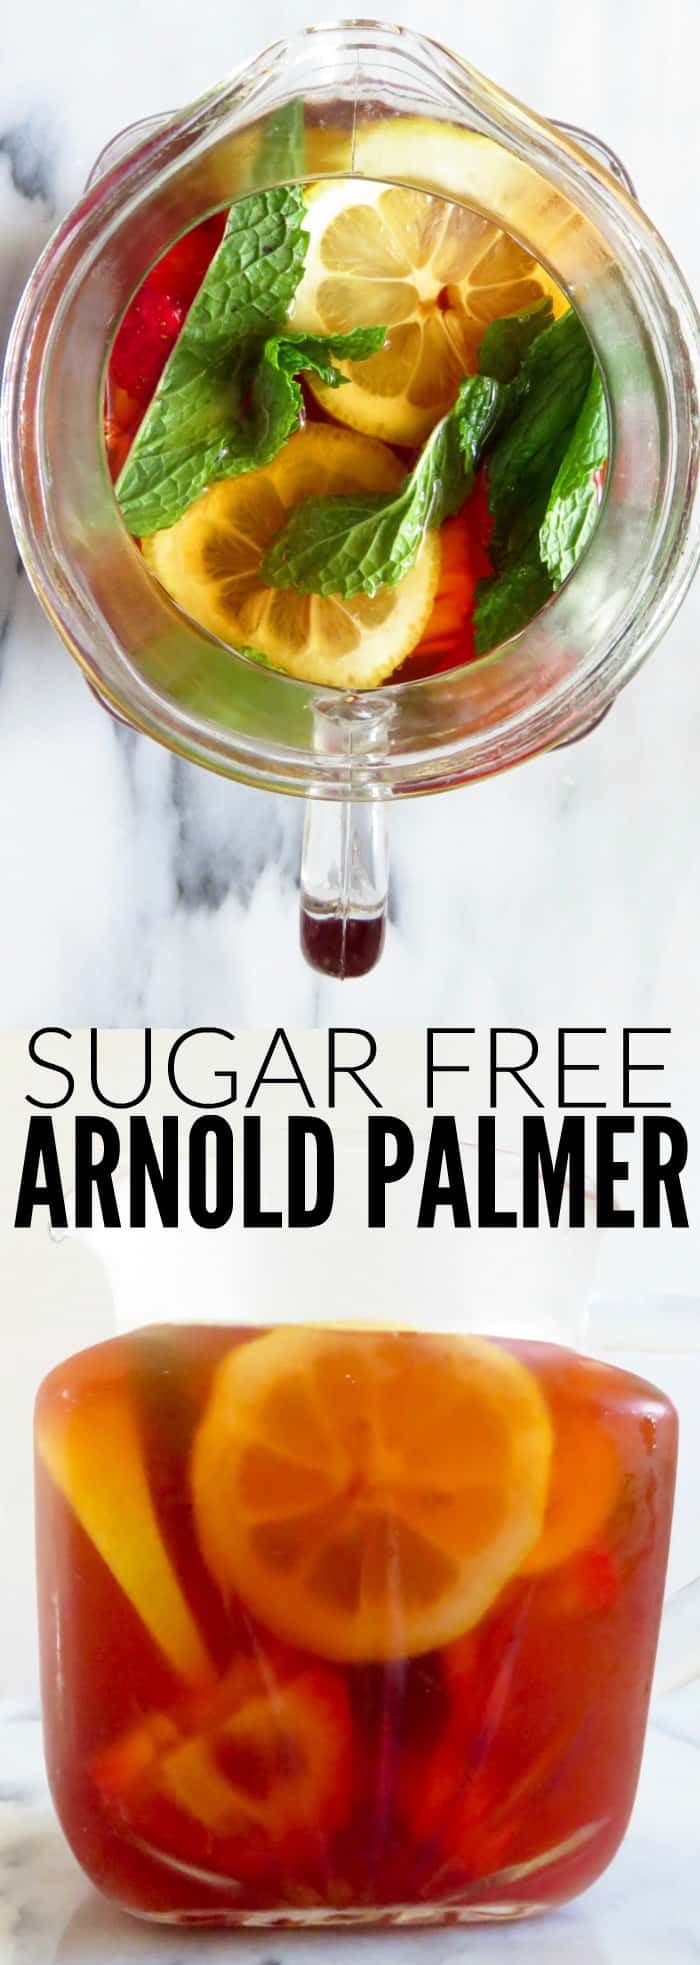 Lighten up your favorite refreshing drink with this sugar free Arnold Palmer!! Get all your favorite lemon and tea flavors but keep it sugar free! thetoastedpinenut.com #sugarfree #arnoldpalmer #drink #beverage #lemonade #icedtea